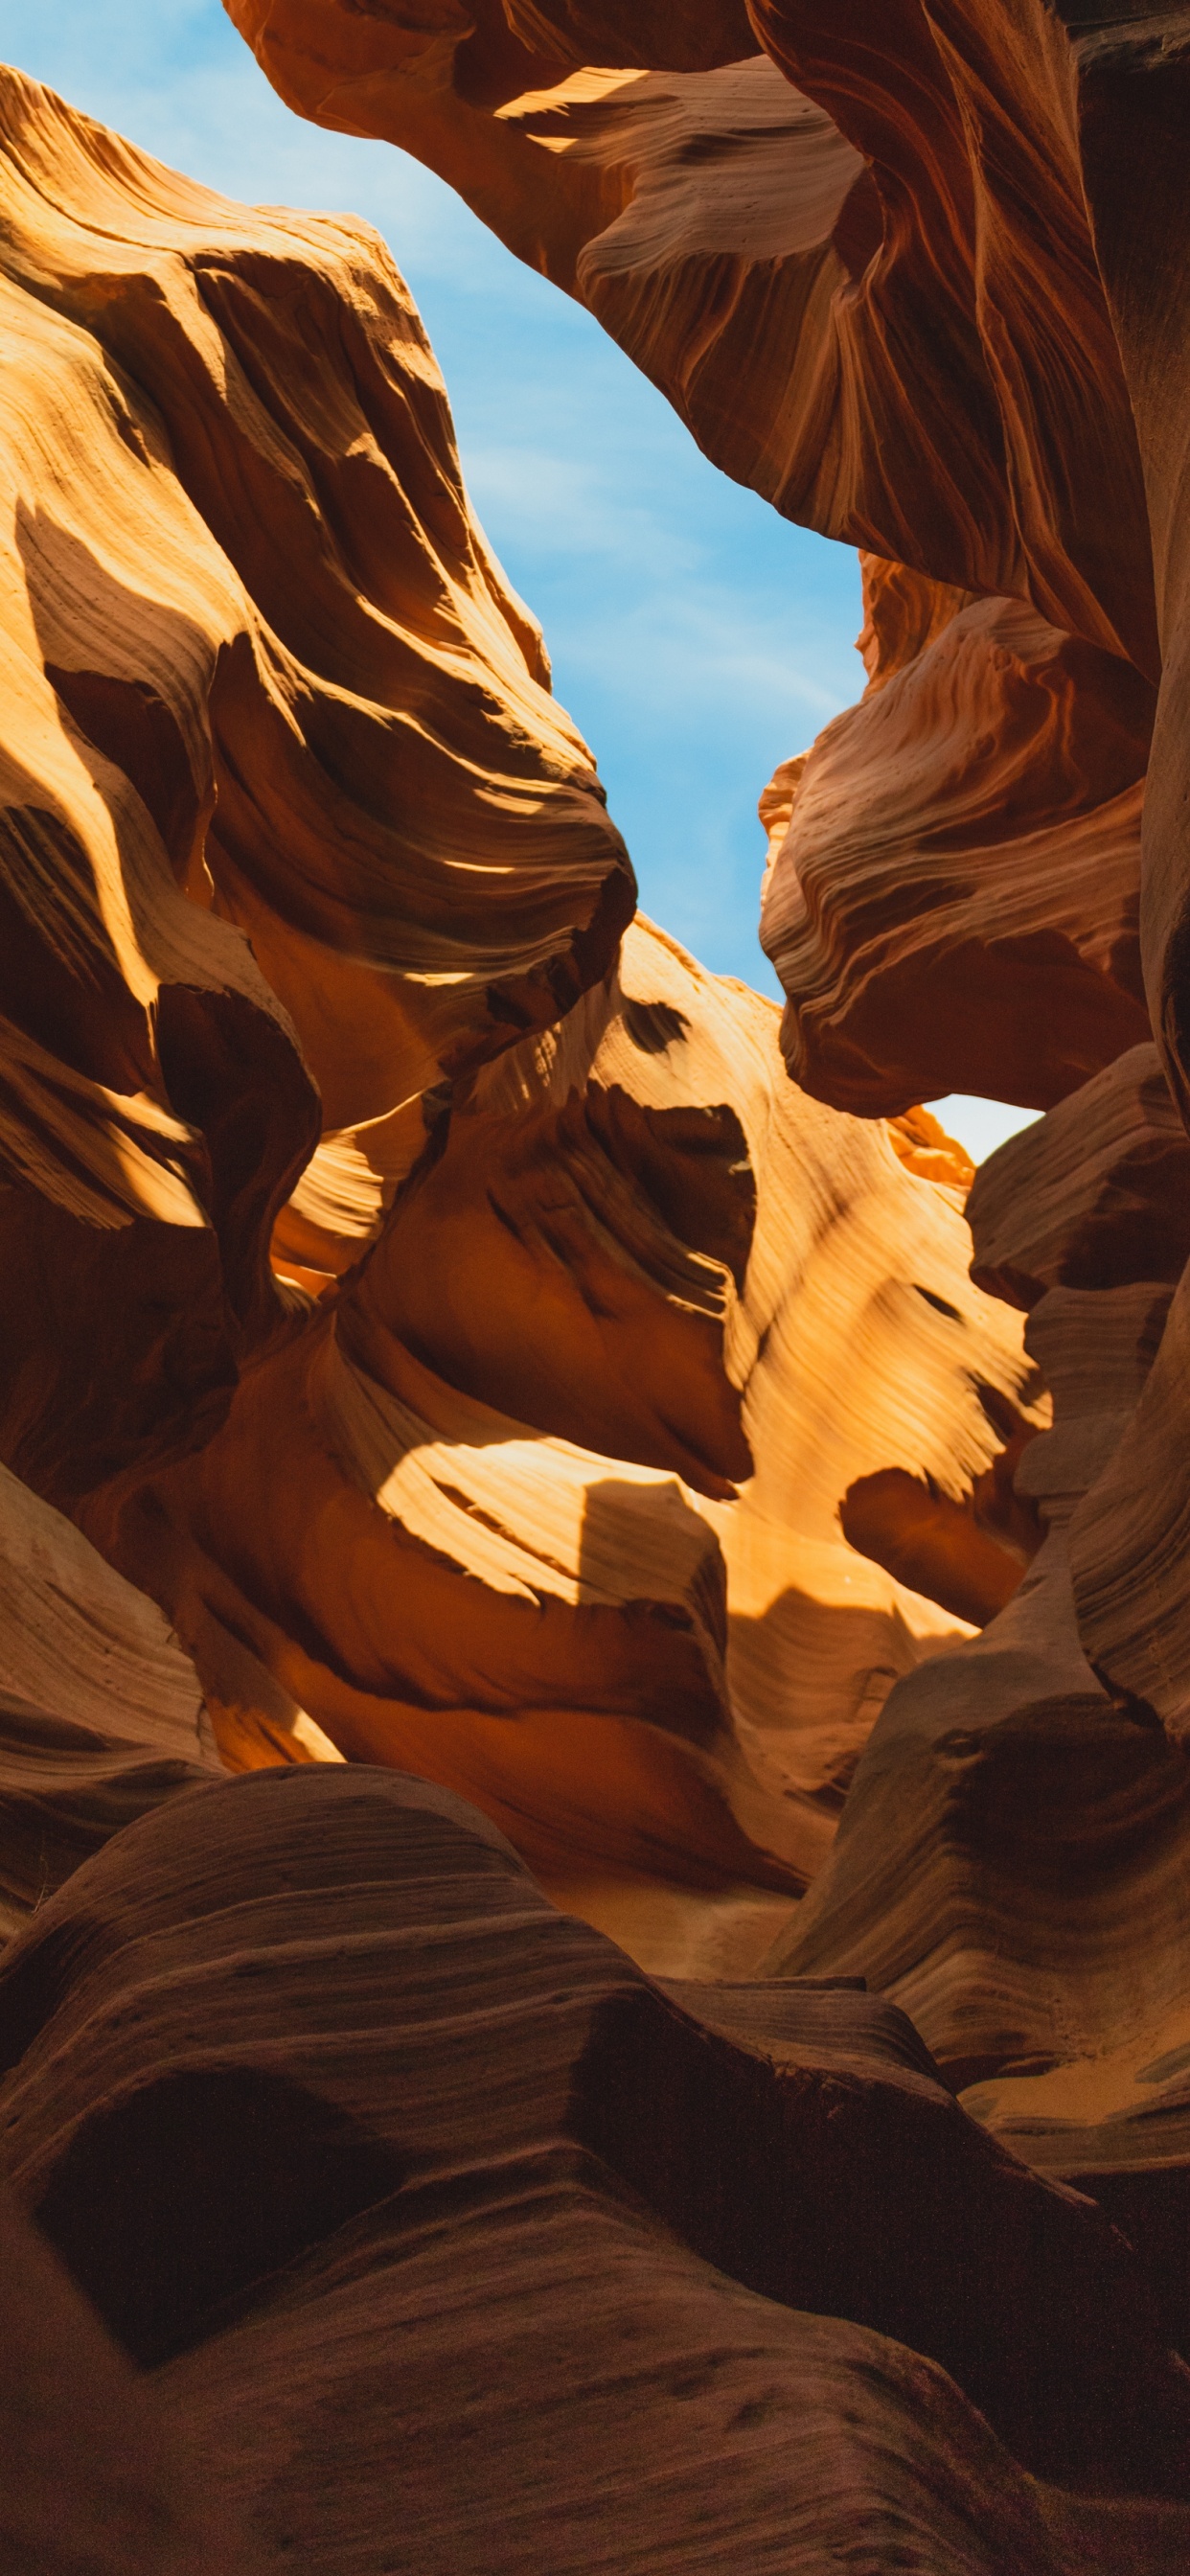 Brown Rock Formation During Daytime. Wallpaper in 1242x2688 Resolution